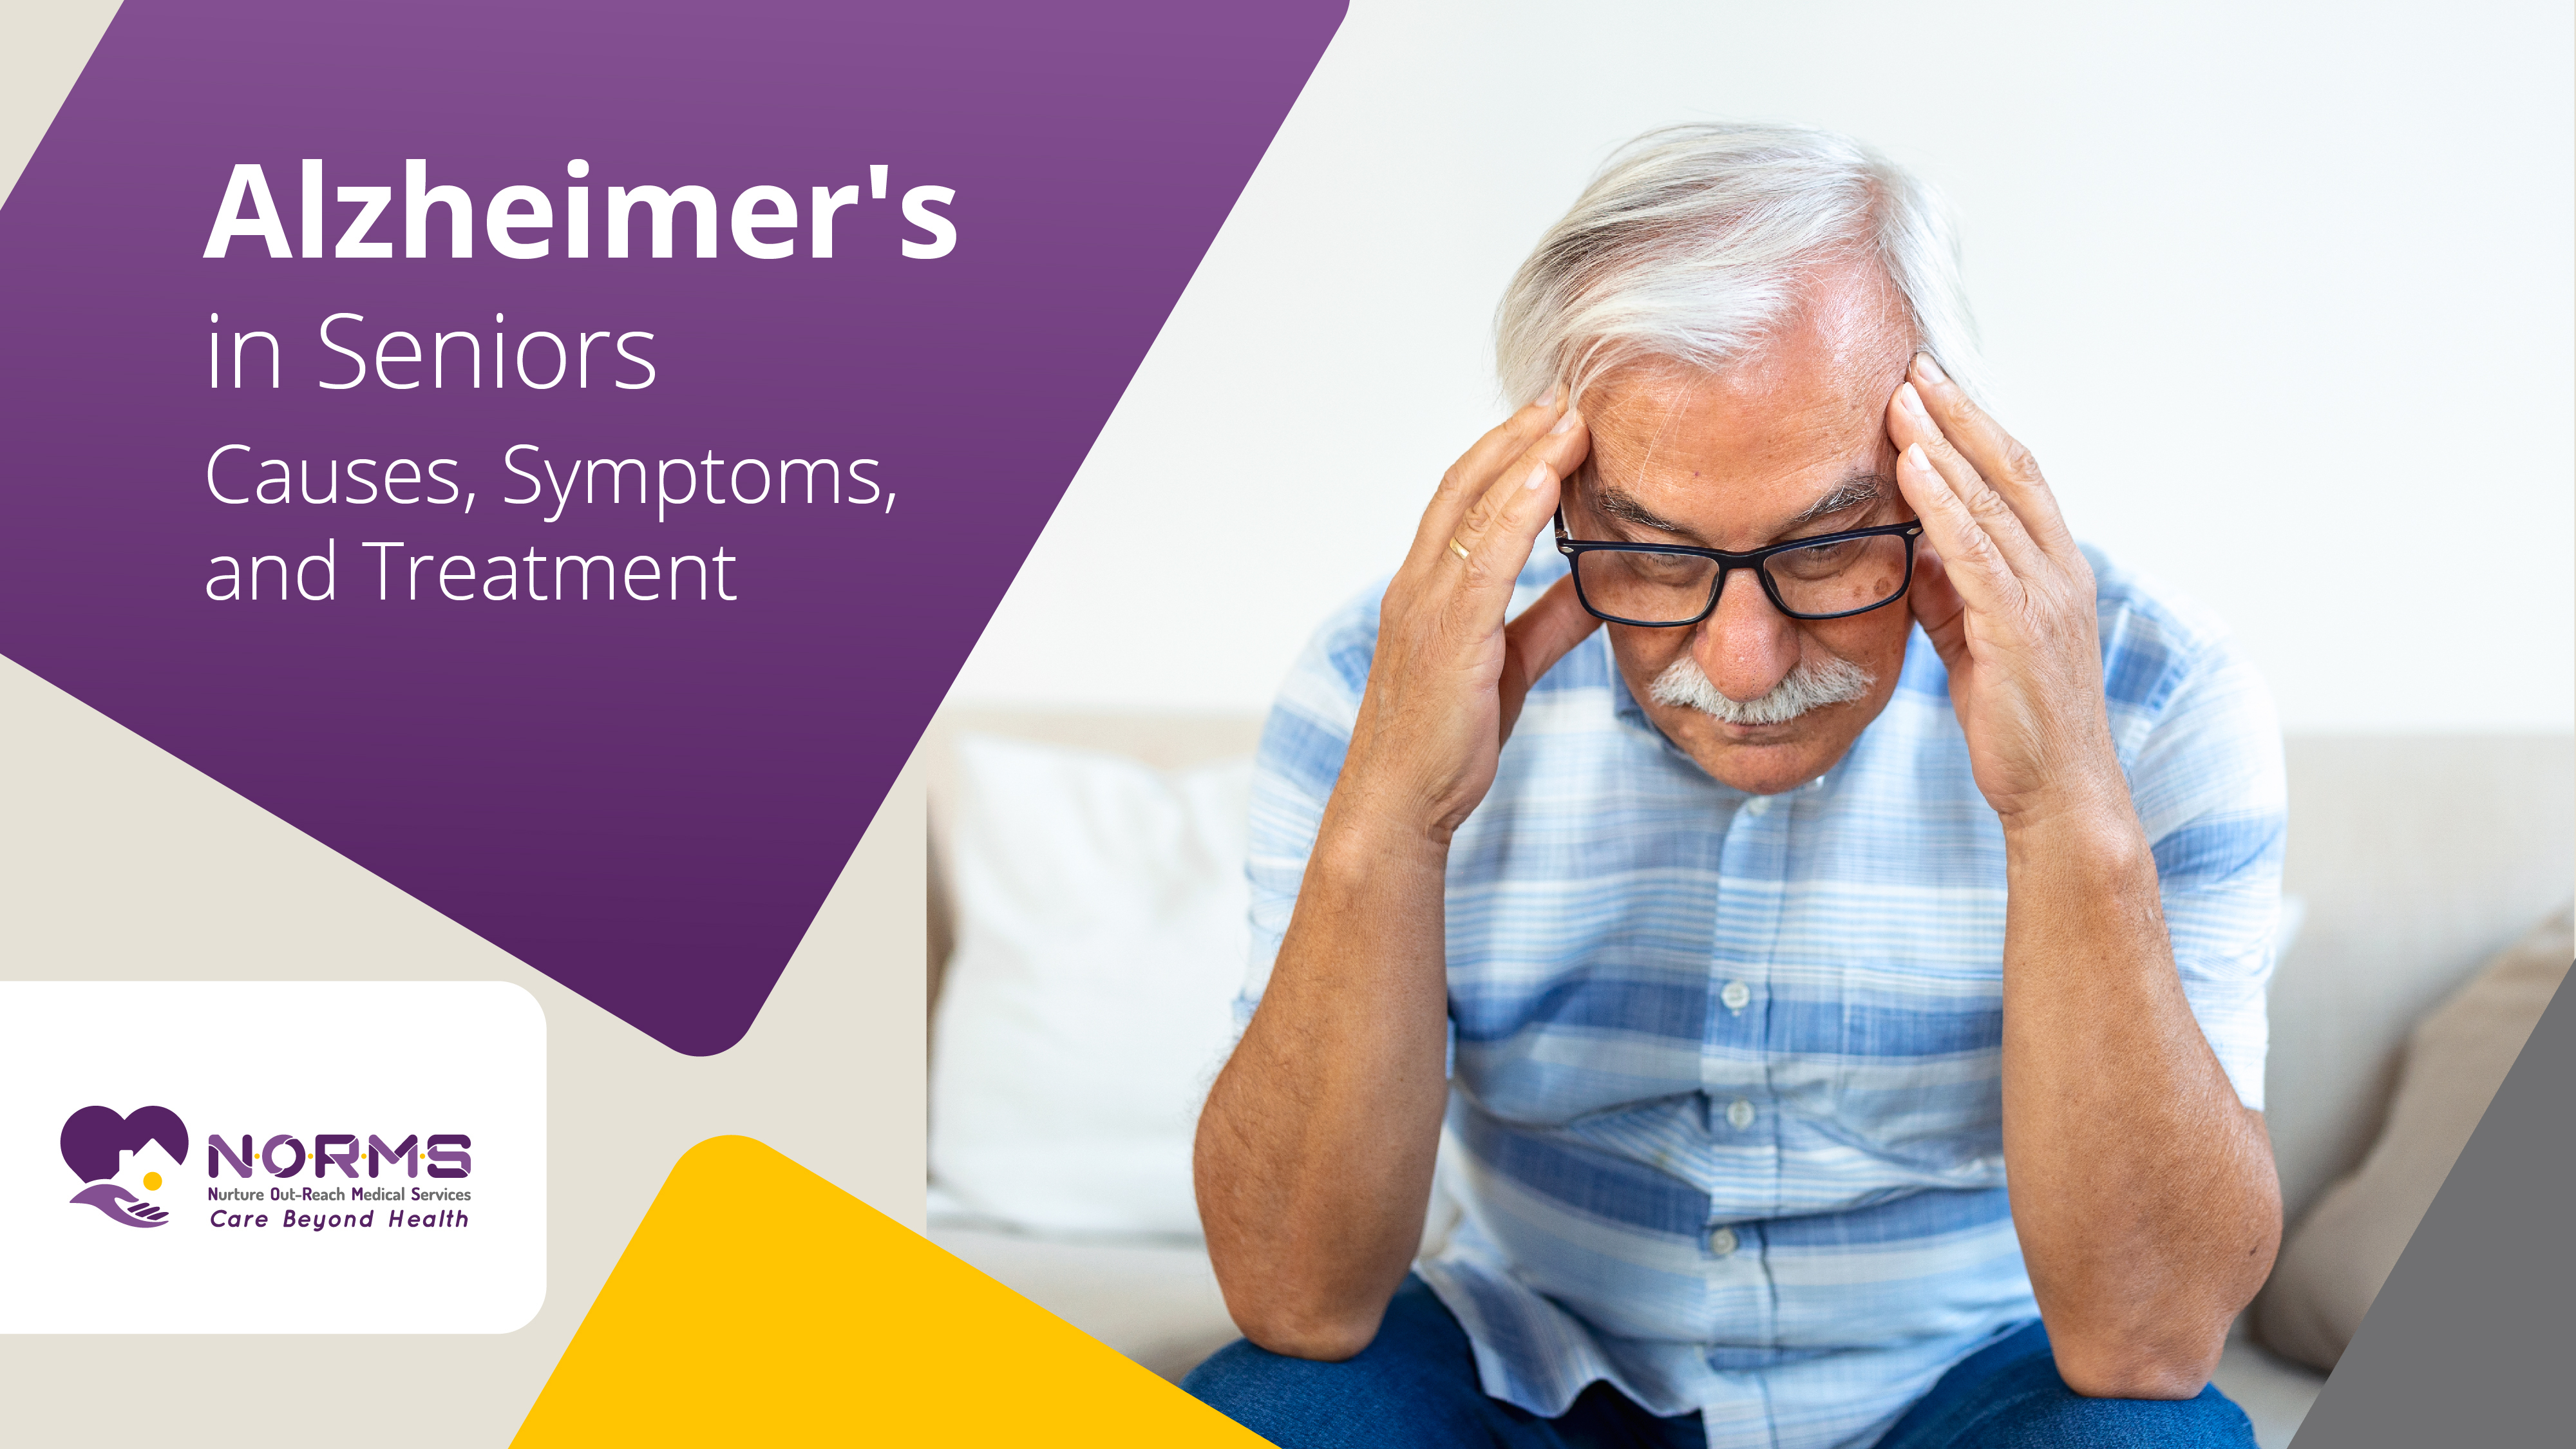 Alzheimer's in Seniors: Causes, Symptoms, and Treatment